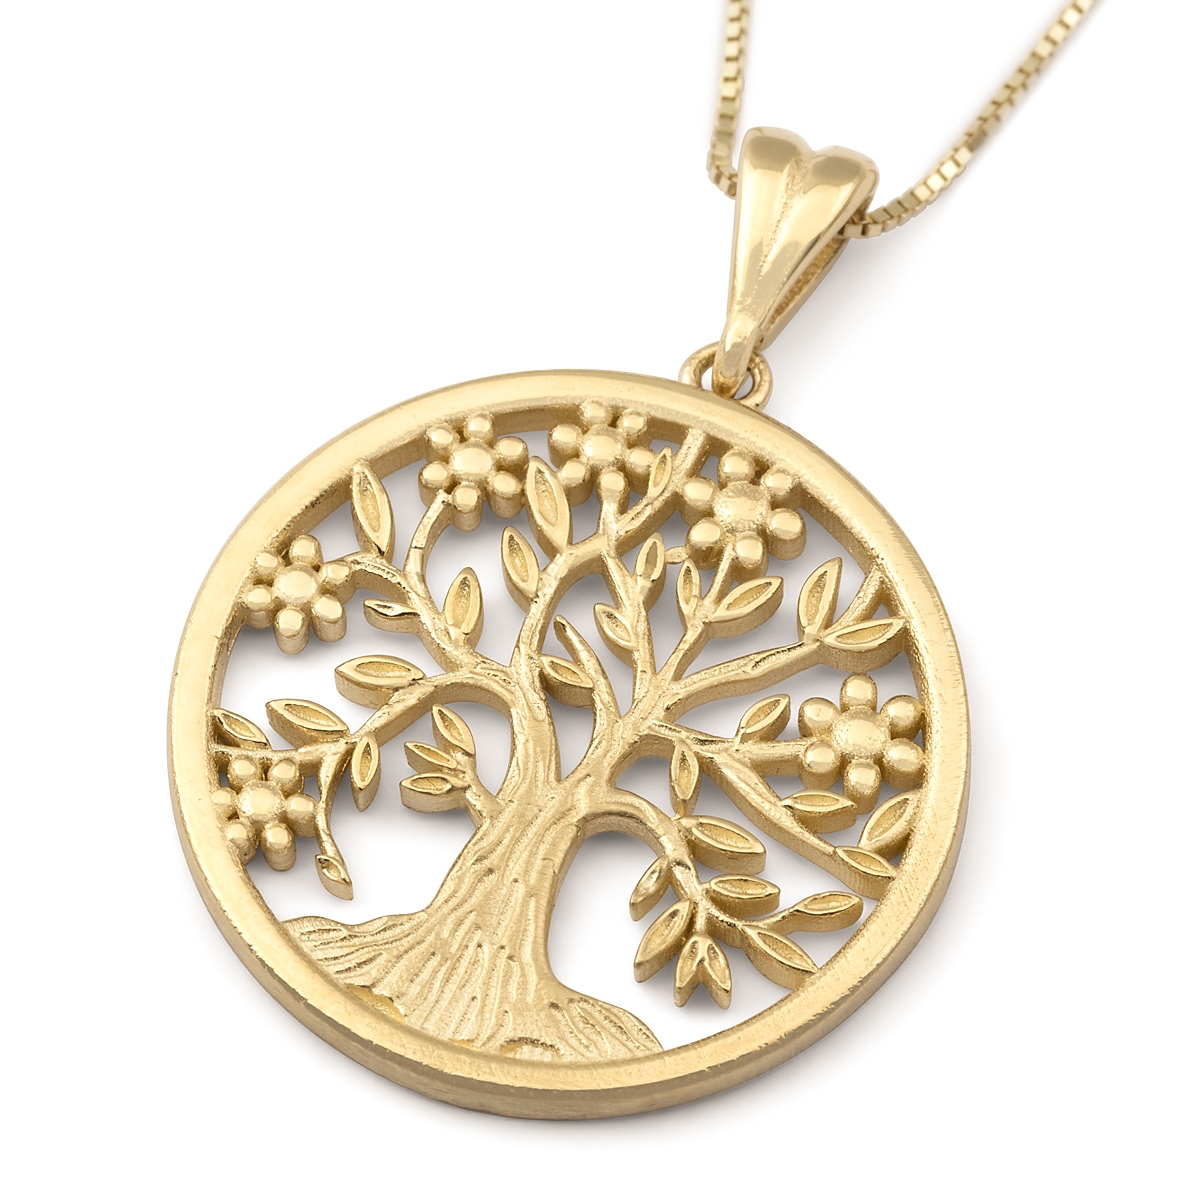 Deluxe 14K Gold Tree of Life Pendant Necklace - 1